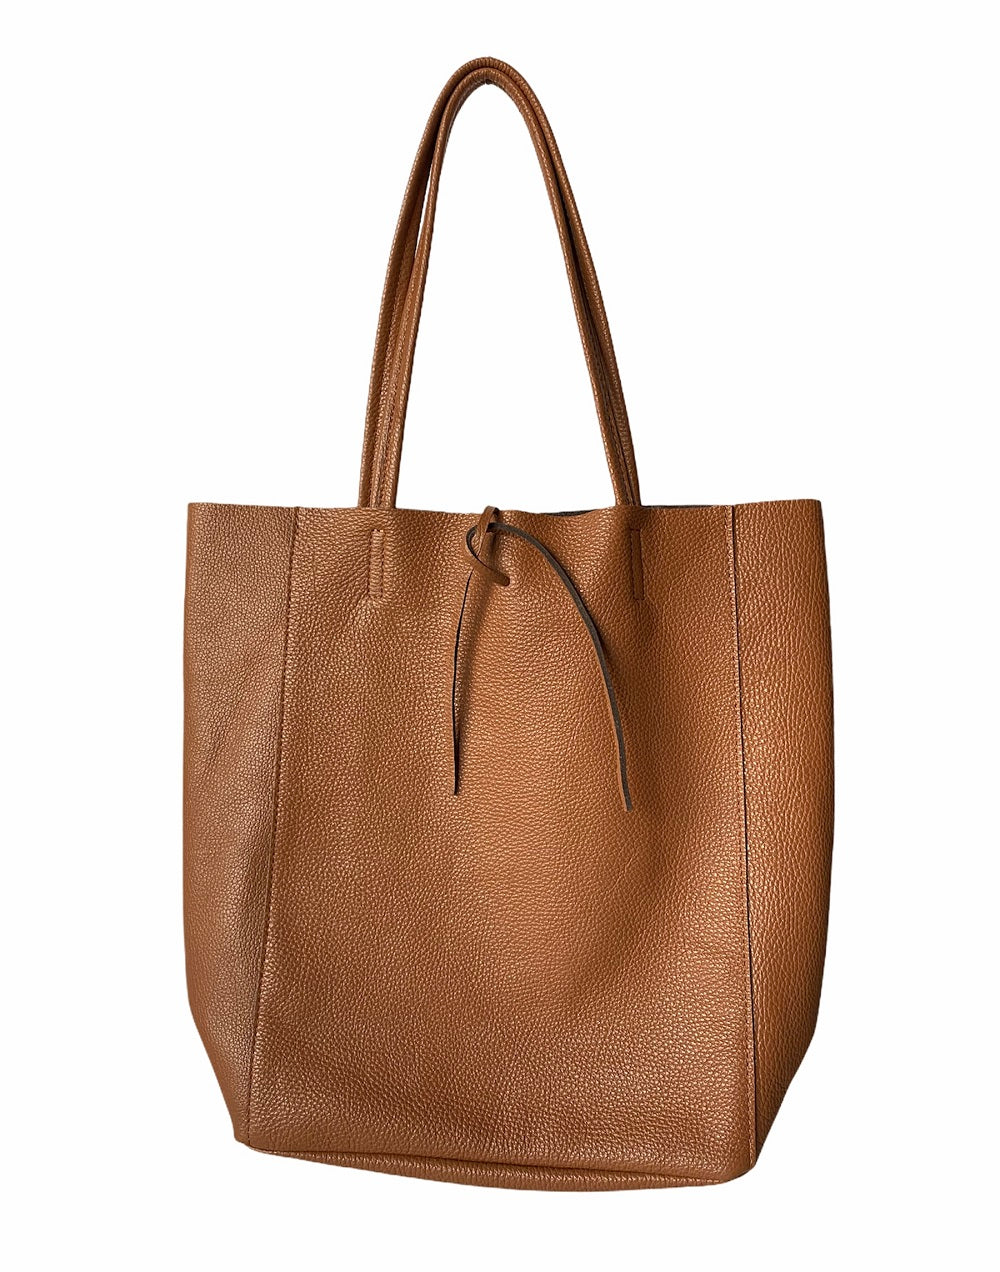 Top 15 Buttery Soft Leather Handbags | LoveToKnow